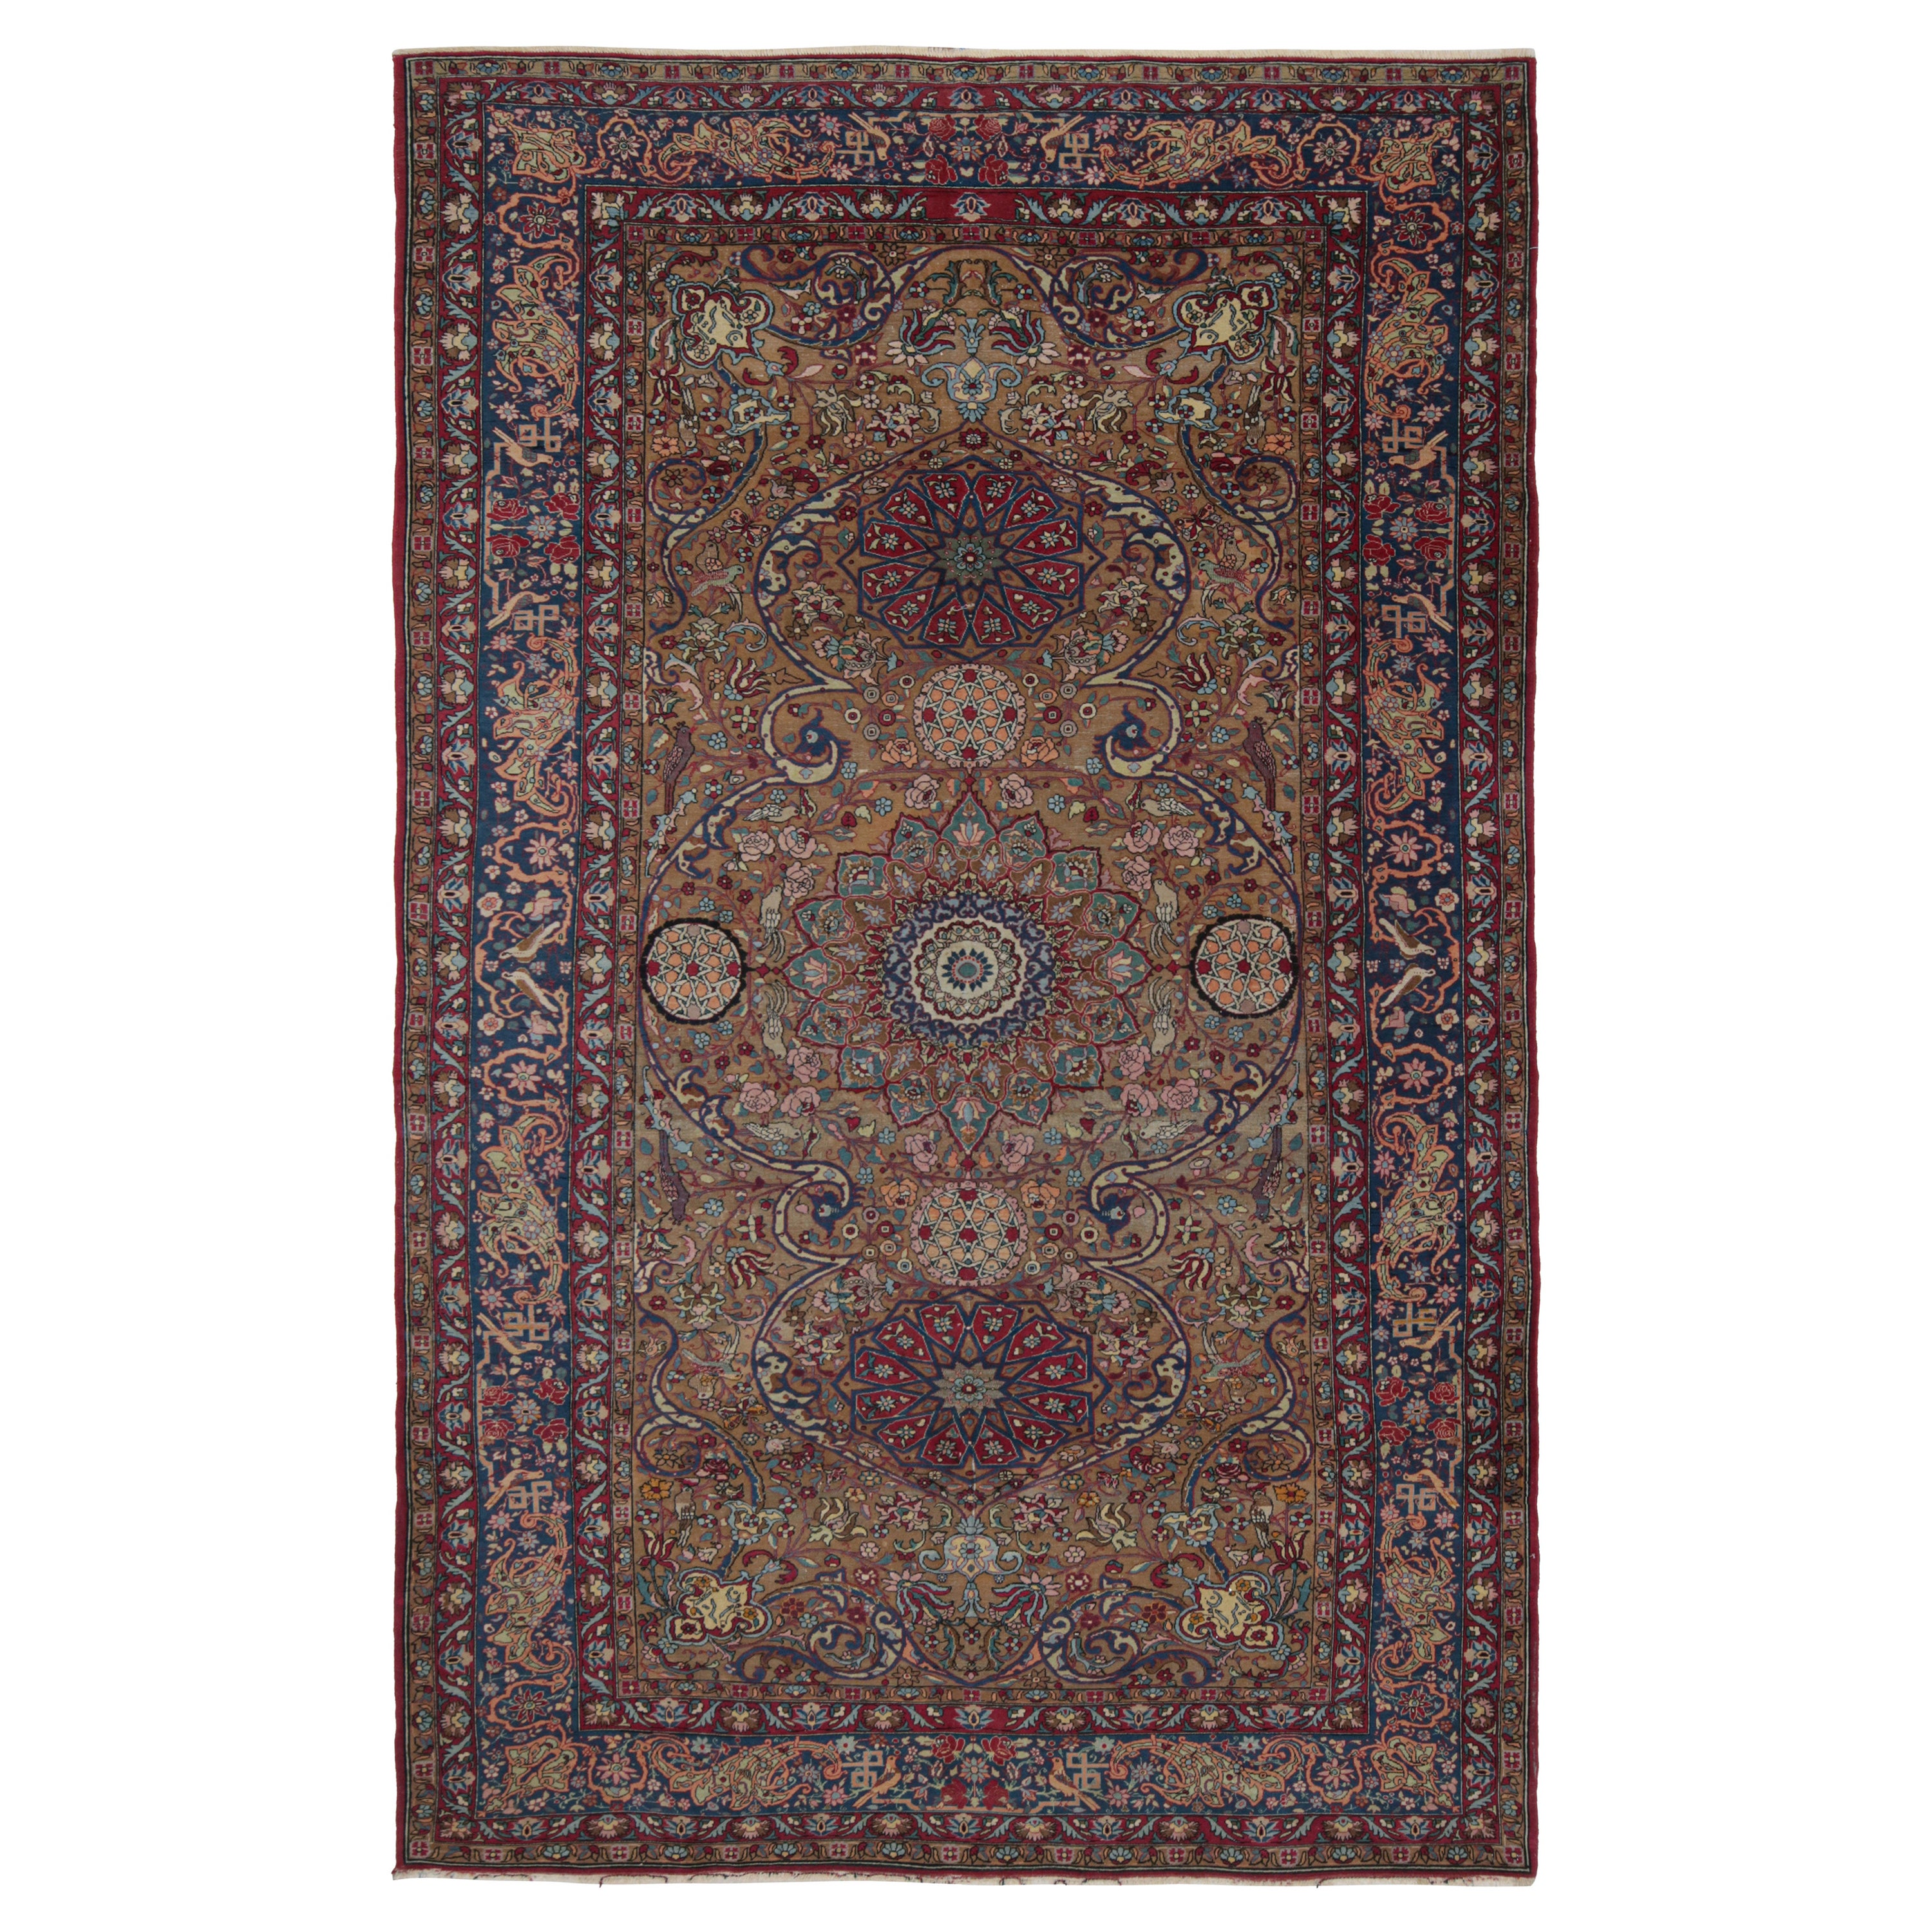 Antique Persian Rug in Chocolate Brown with Floral Medallions For Sale